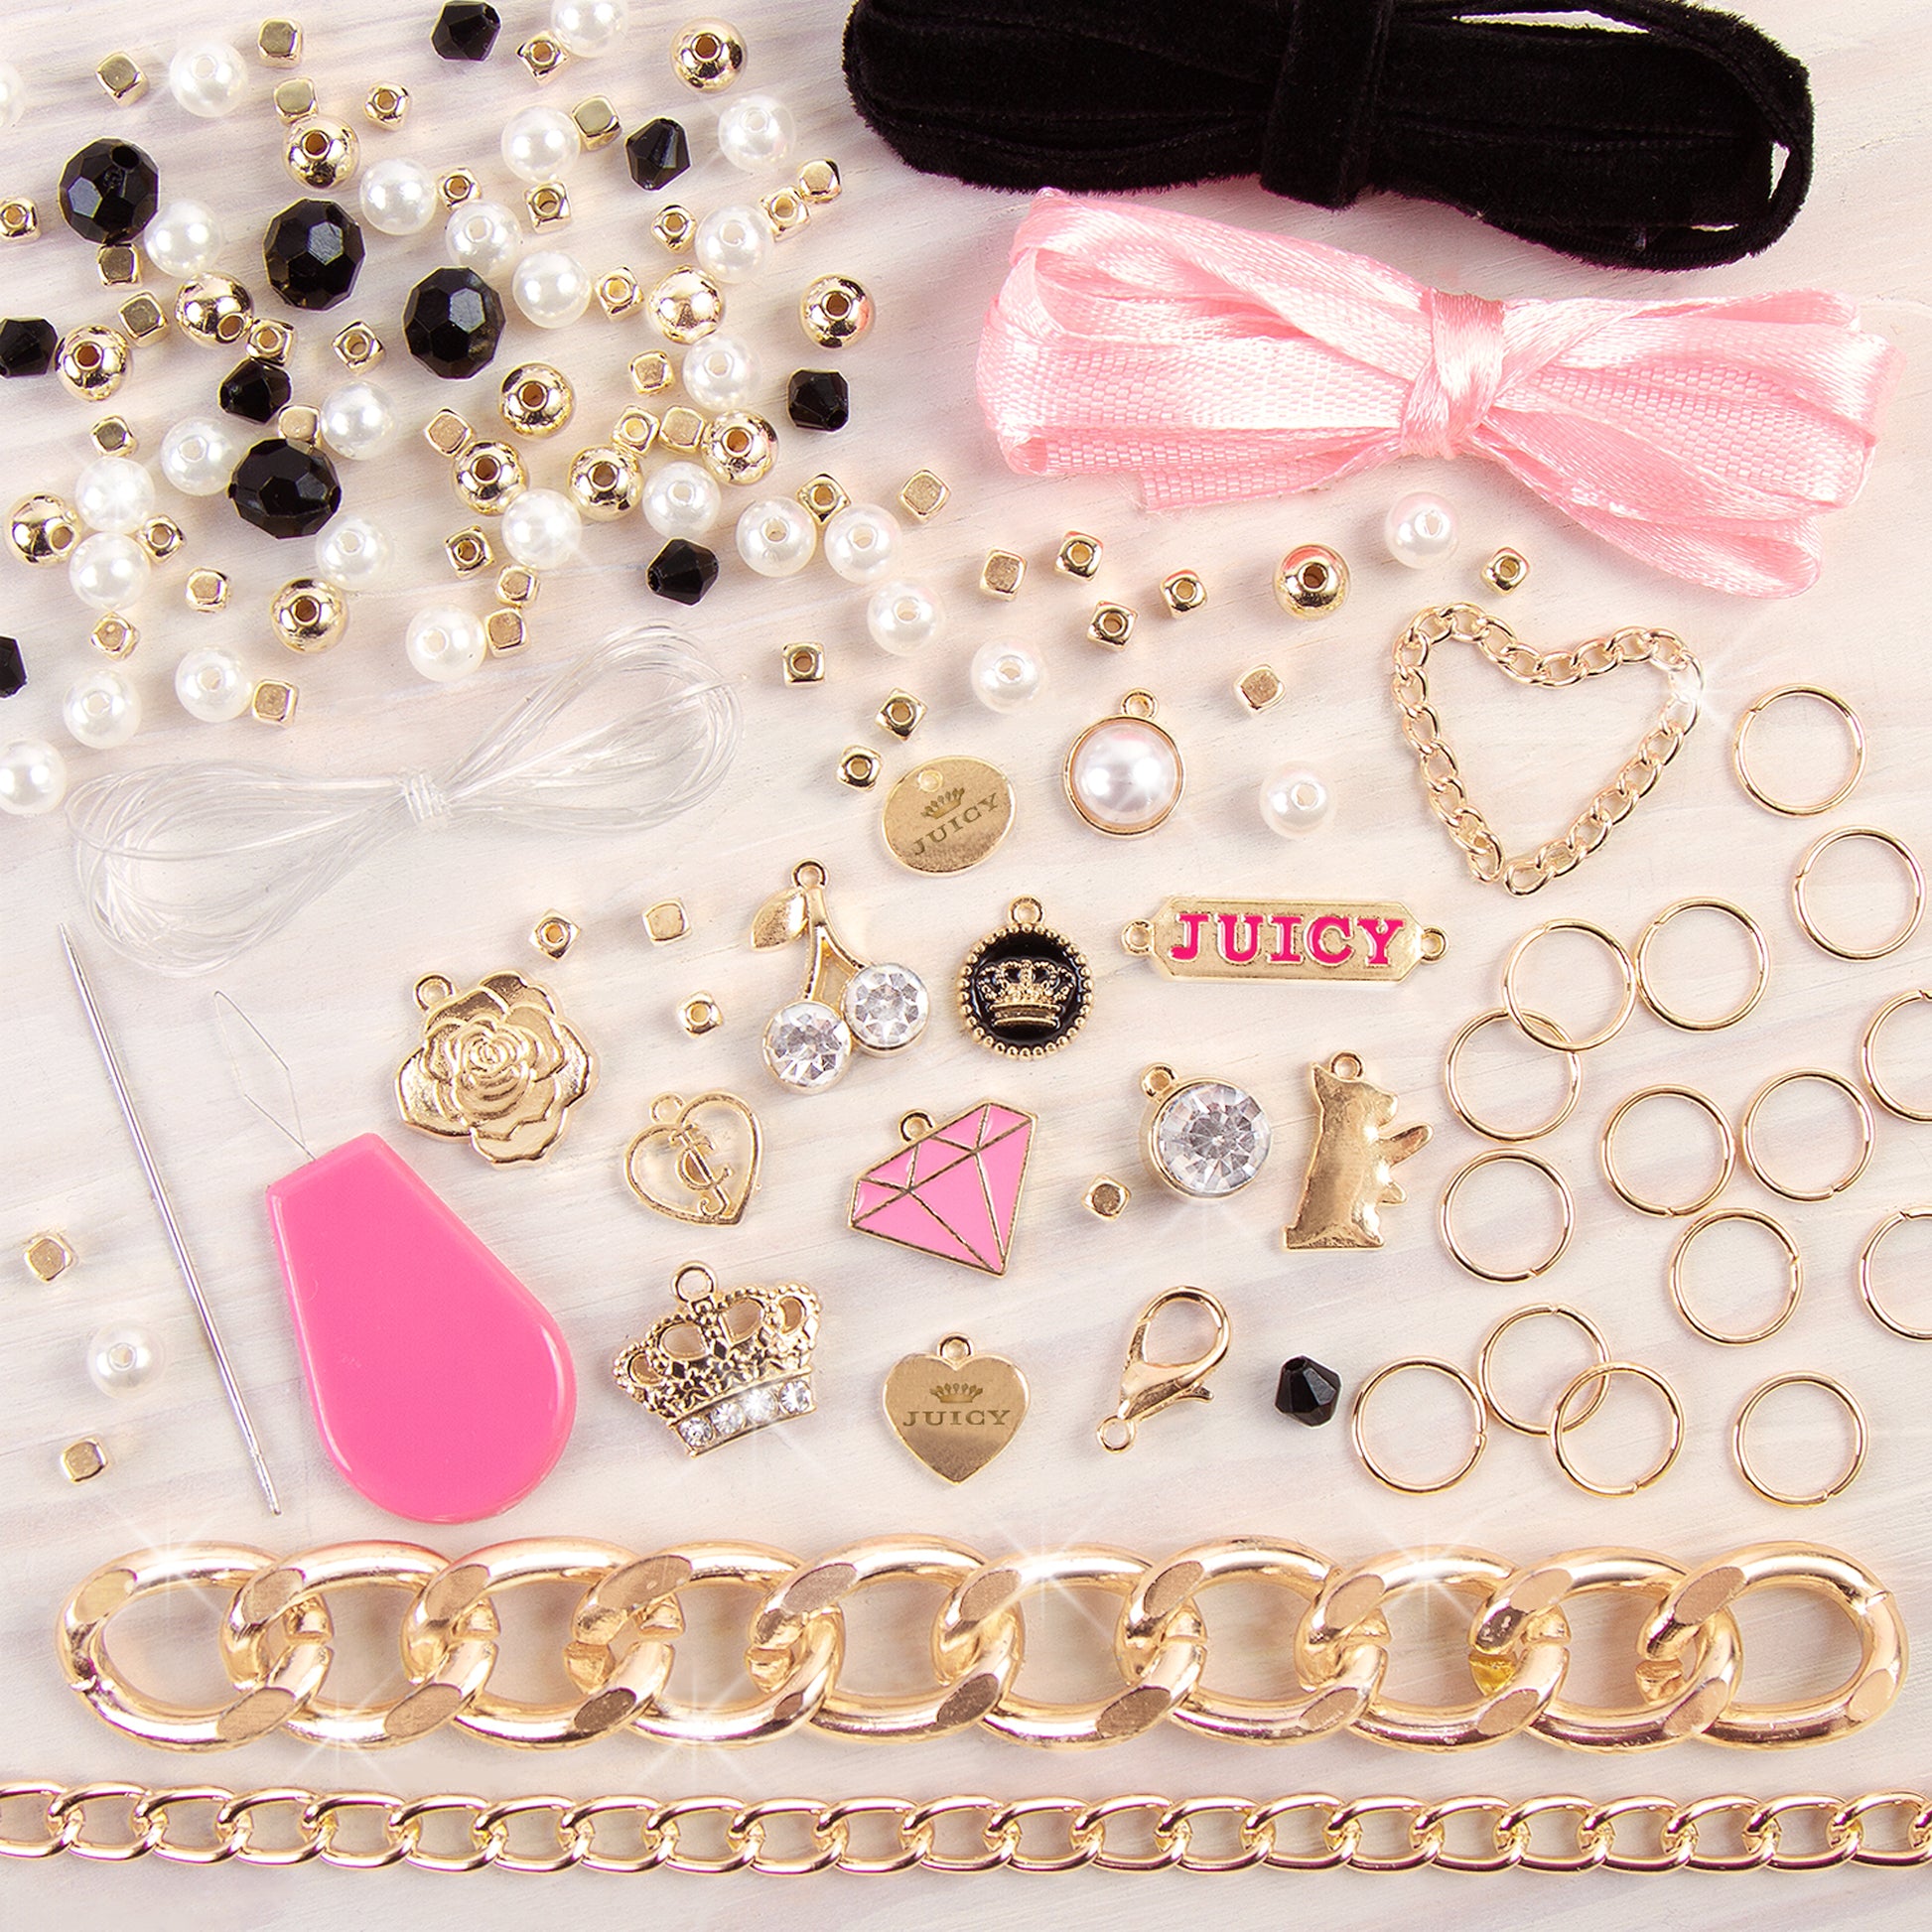  Make It Real - Juicy Couture Absolutely Charming Bracelet  Making Kit - Kids Jewelry Making Kit - DIY Charm Bracelet Making Kit for  Girls - Friendship Bracelets with Charms for Girls